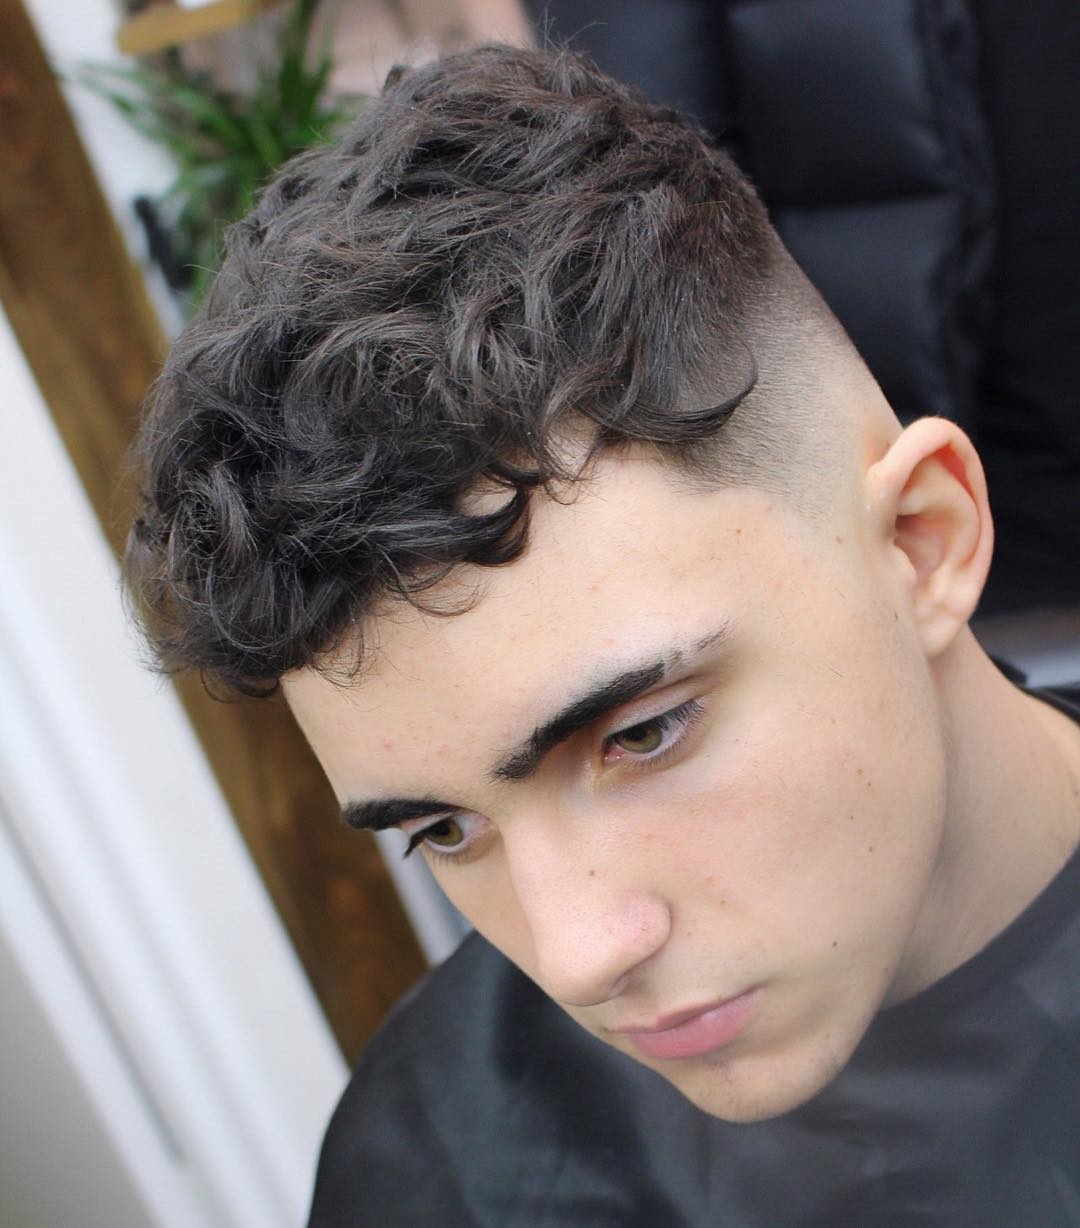 haircuts for people with curly hair 4 - Haircuts for People With Curly Hair